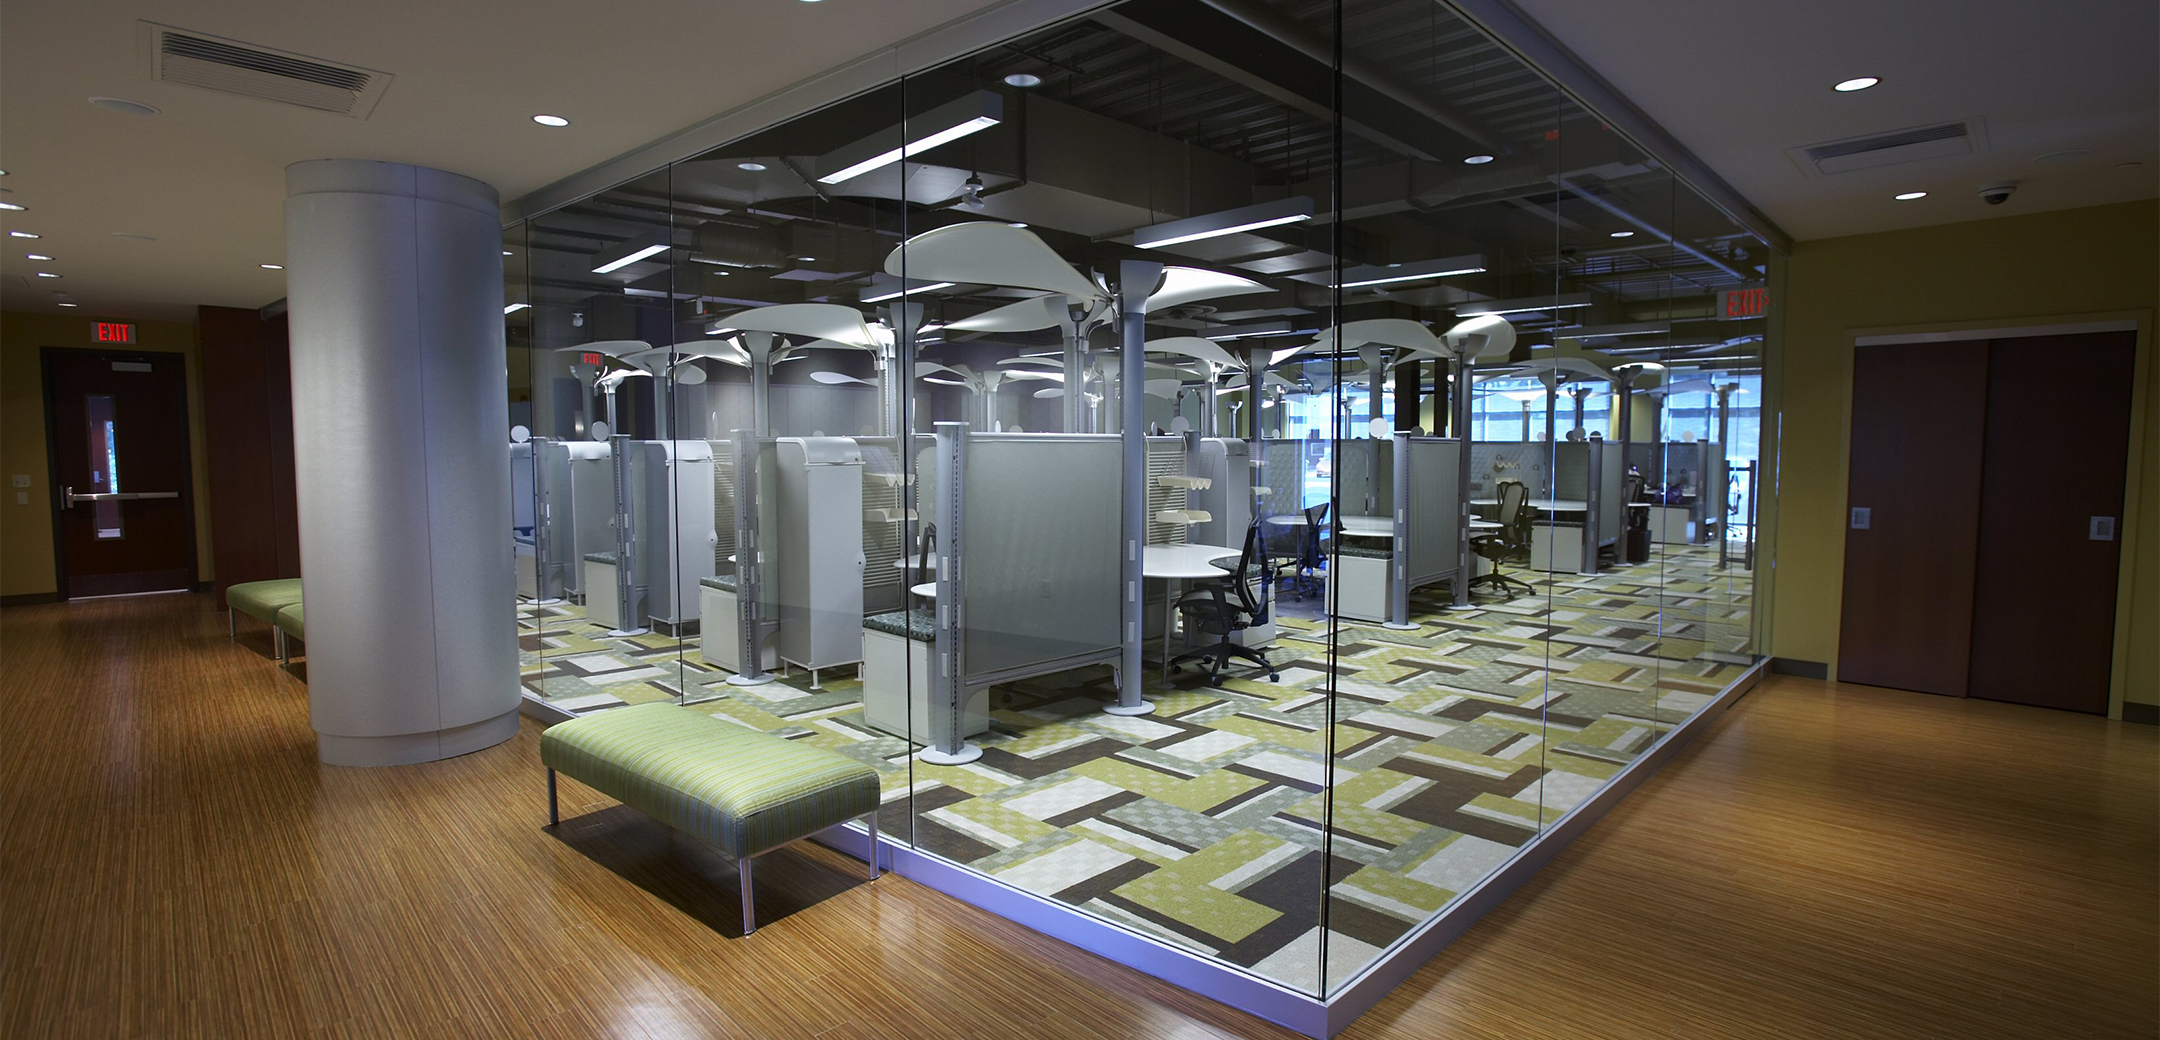 An interior hallway photo of the South Jersey Federal Union building featuring polished wood flooring, all glass walls showcasing the office space.